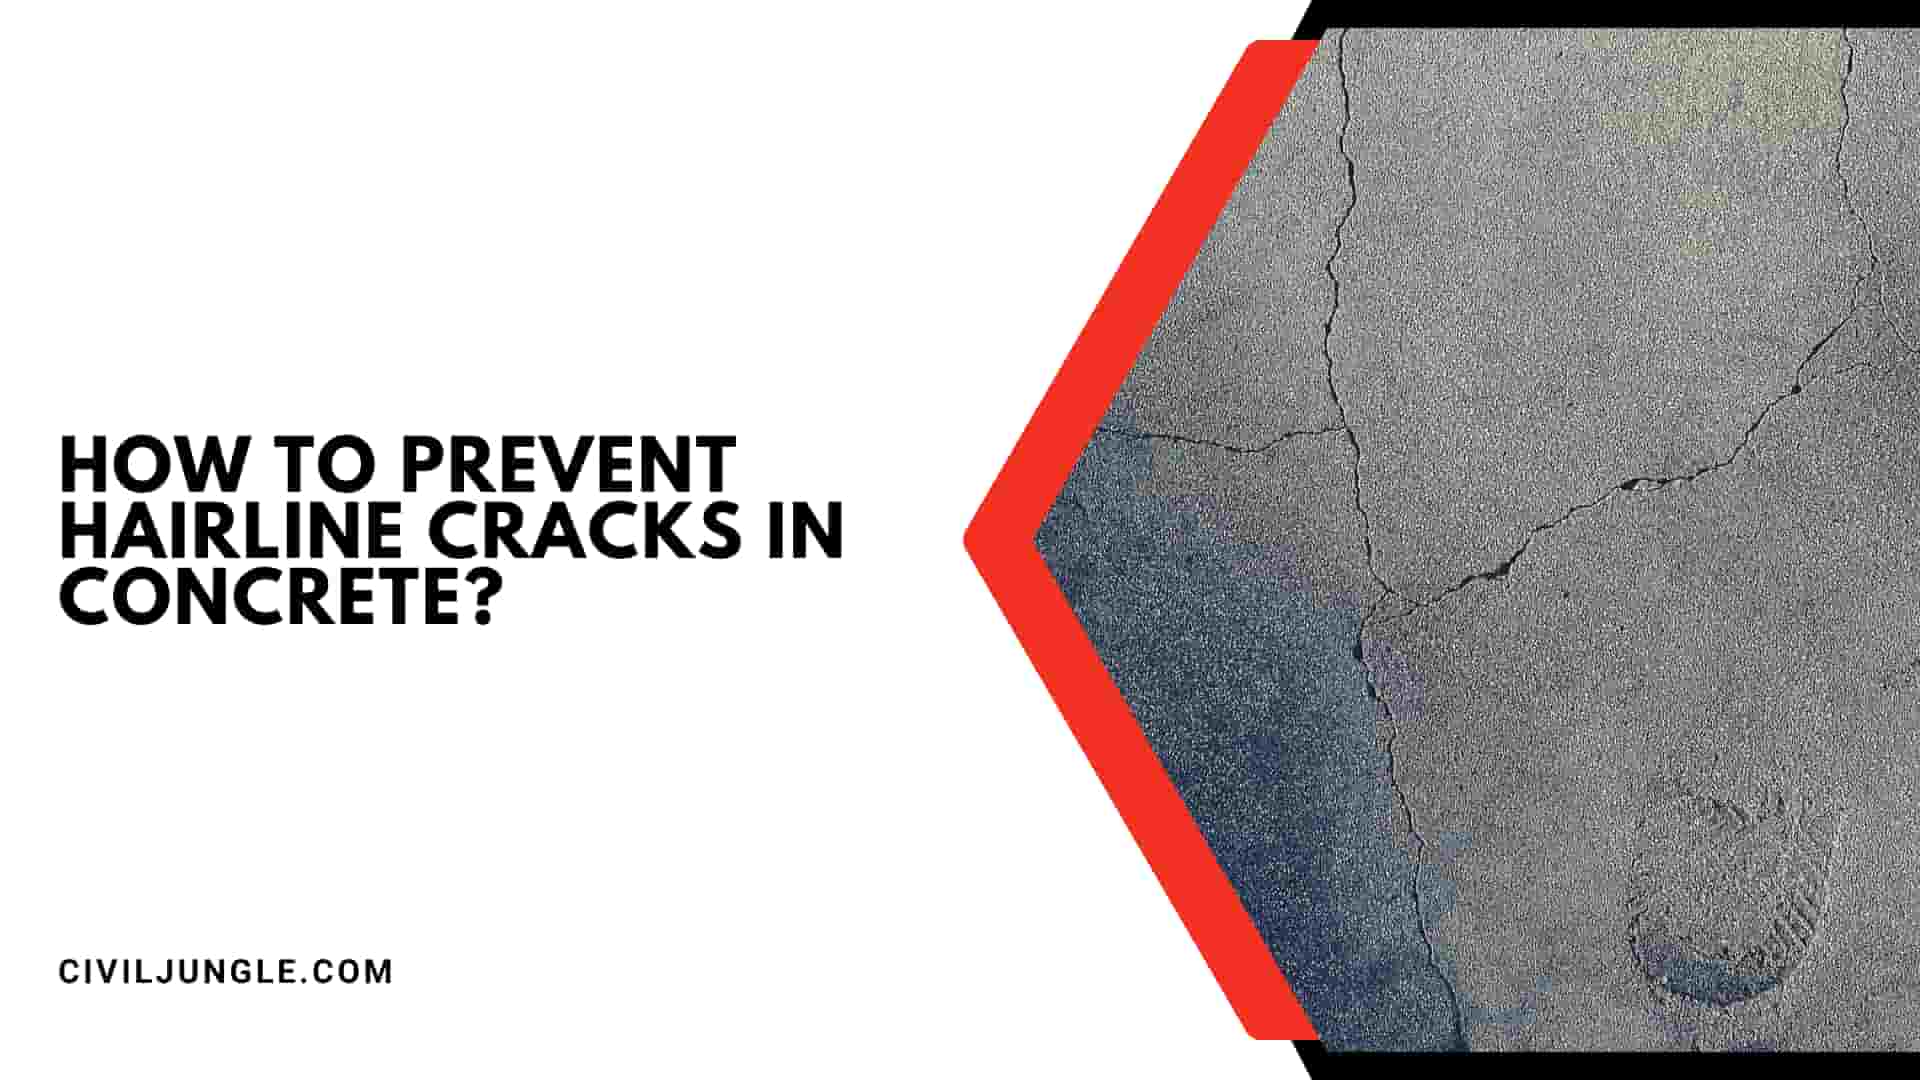 How To Prevent Hairline Cracks In Concrete?